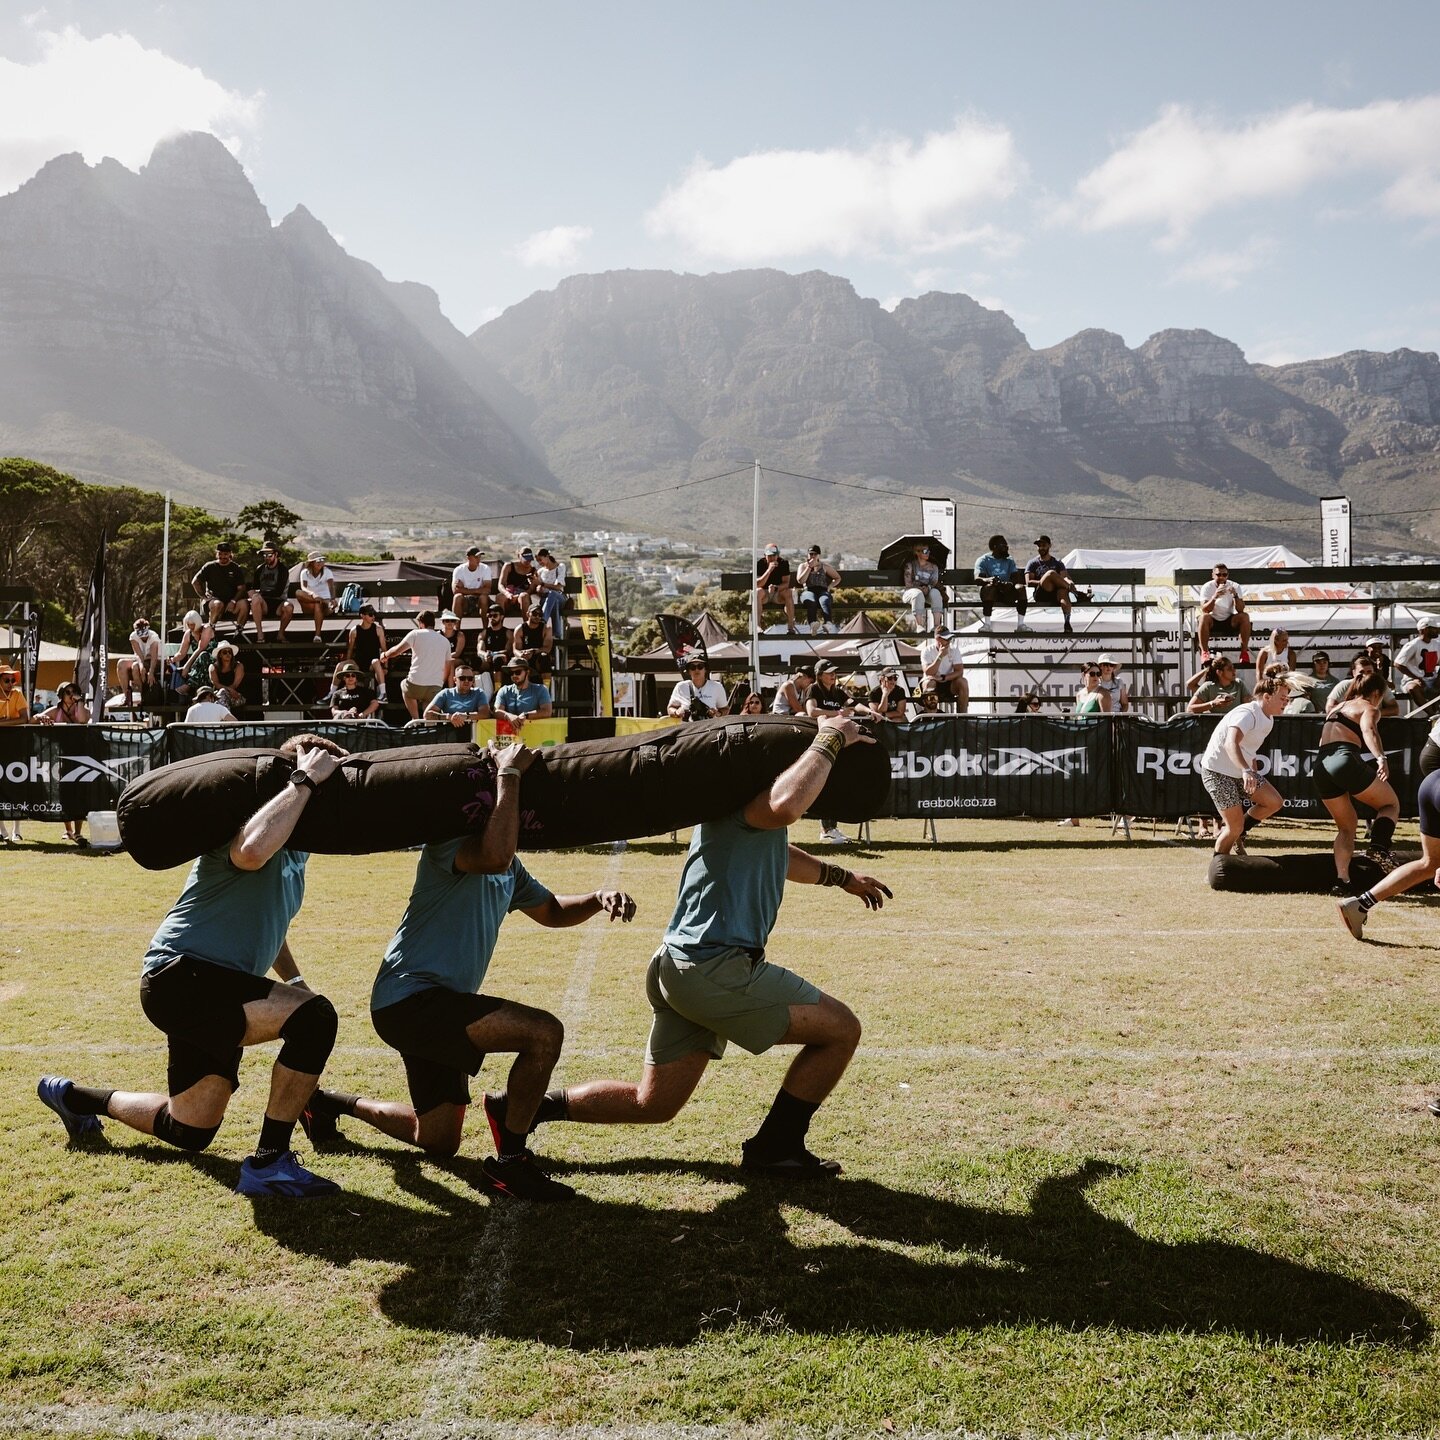 The first #TBT for 2024 🙌

Happy New Year! A new #Fitchella23 album by the amazing @eringoodman_ is up for you😏

Check out our Facebook via the link in our bio 📸

#ThePartyContinues #FitchellaMems #Day1 #FitnessFestival #PartyZone #CapeTown #Summe